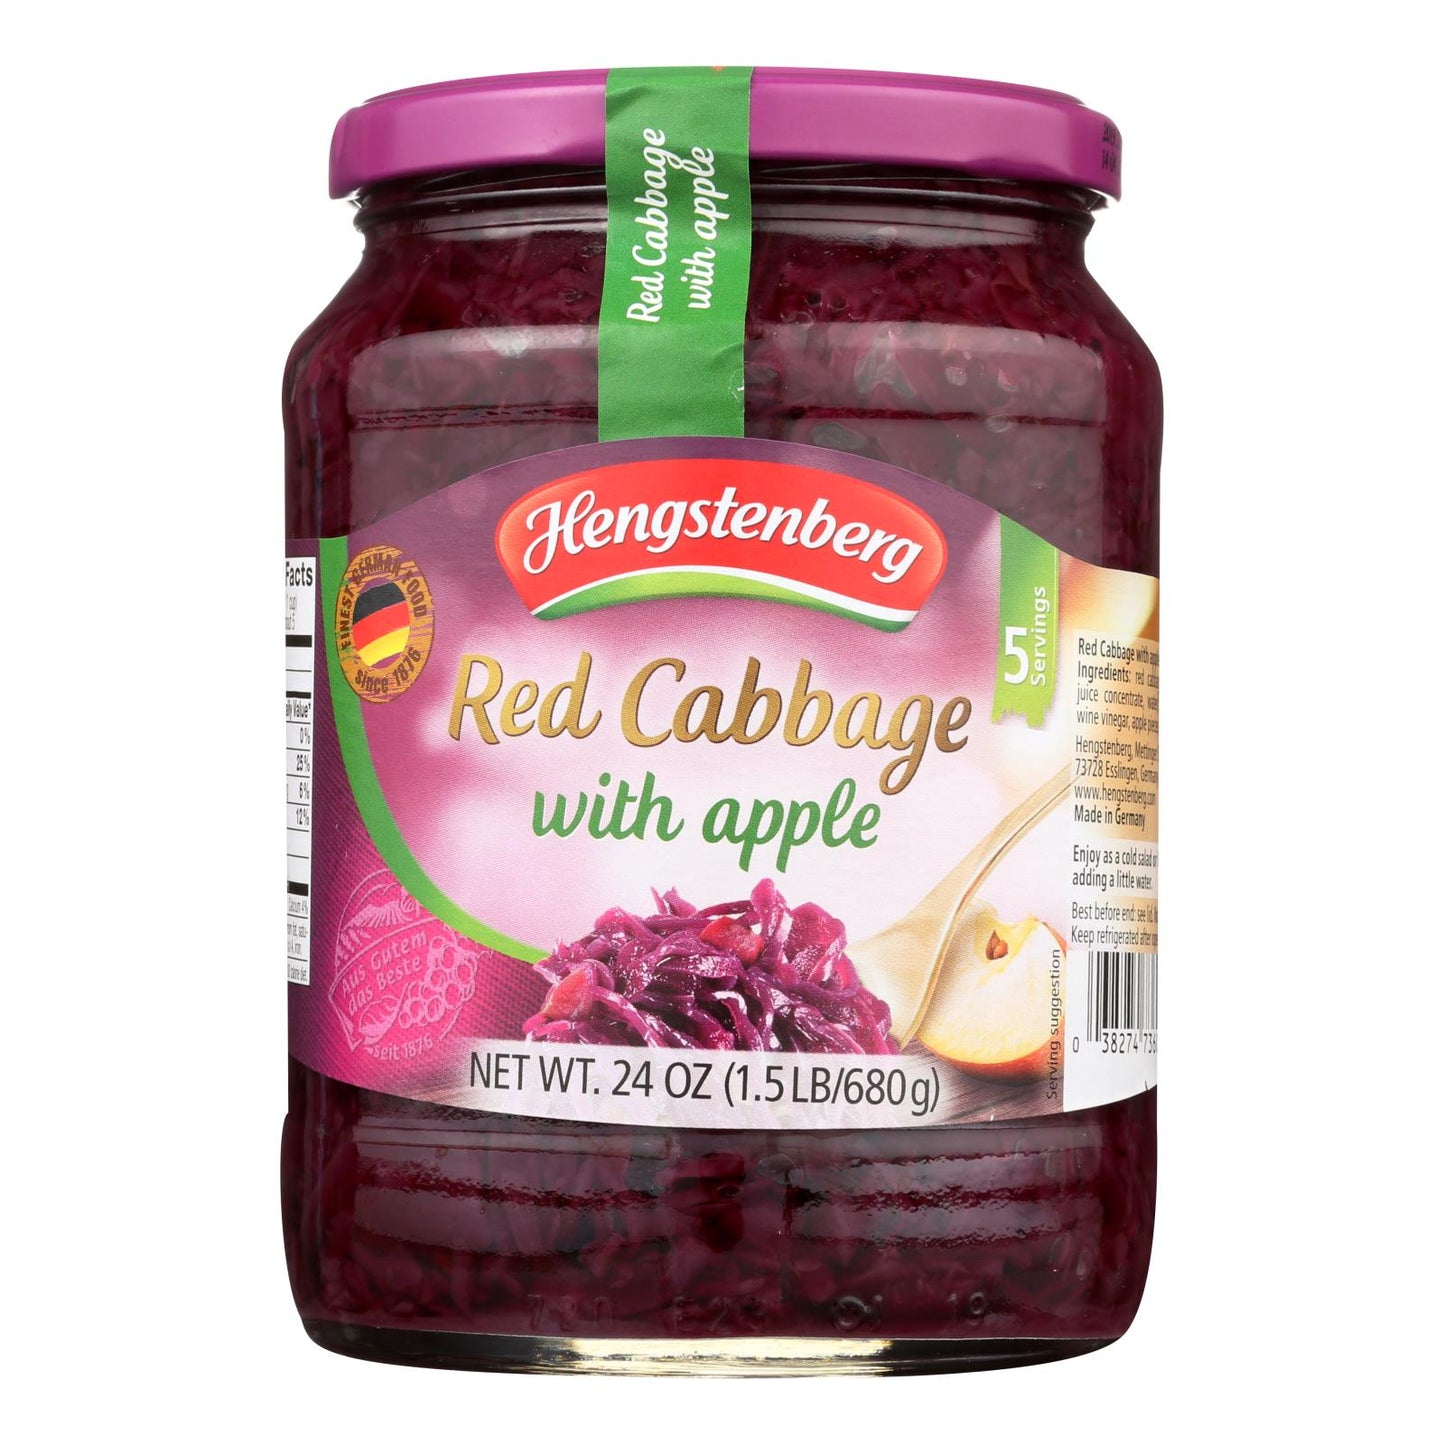 Hengstenberg Red Cabbage With Apple - Case Of 12 - 24.3 Oz.